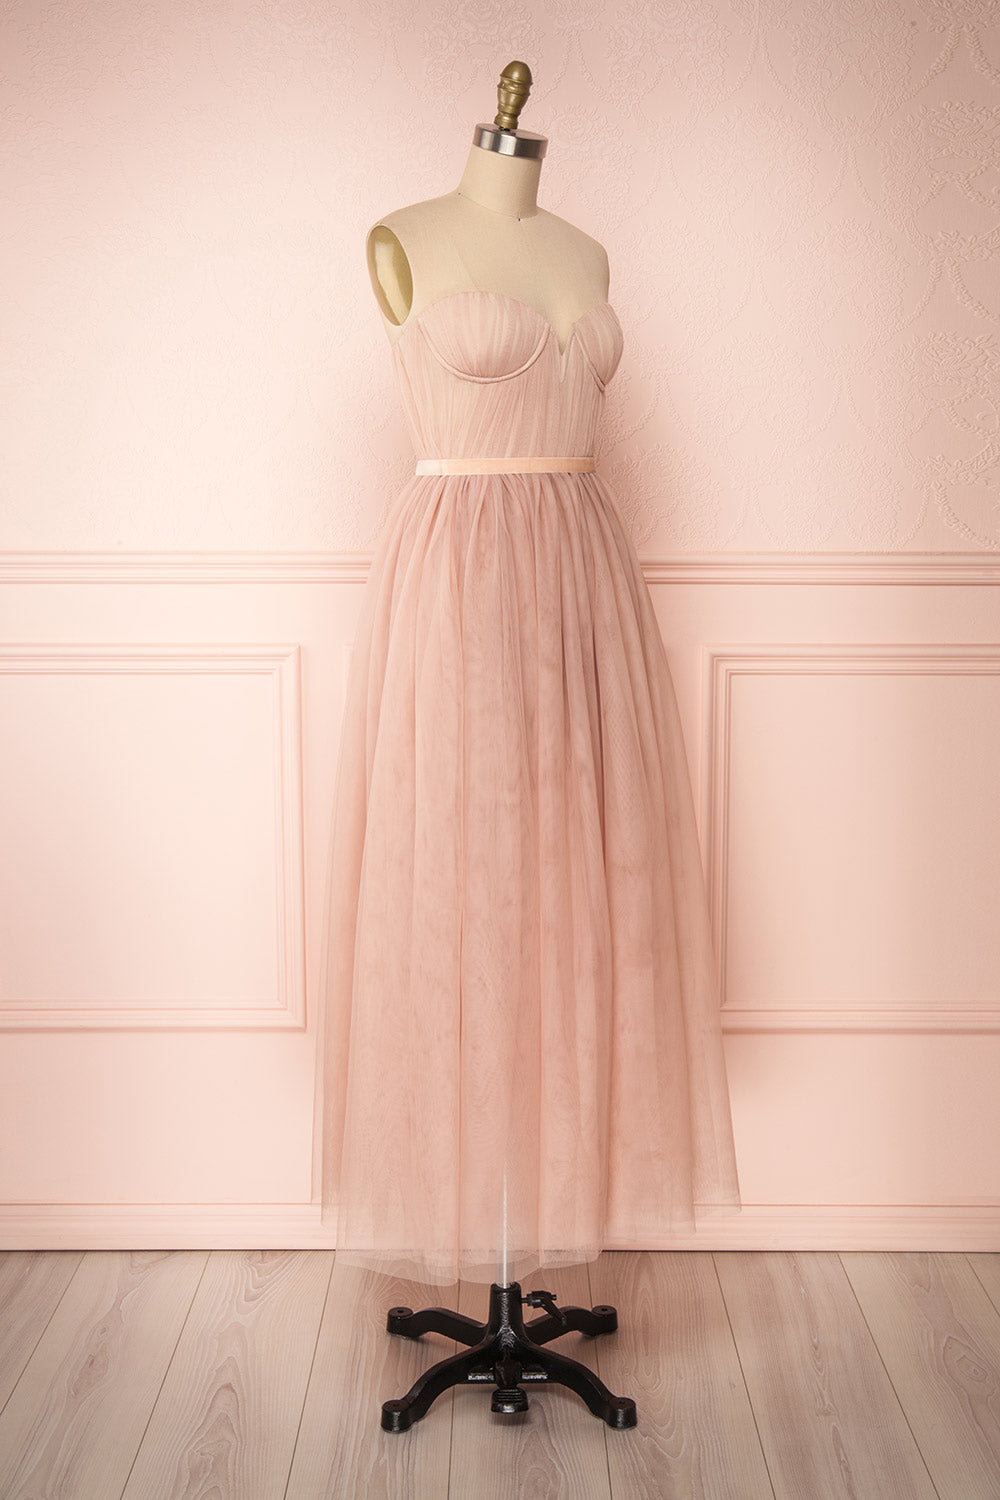 Ombeline Blush Pink Tulle Midi Bustier Dress | Boutique 1861 side view 